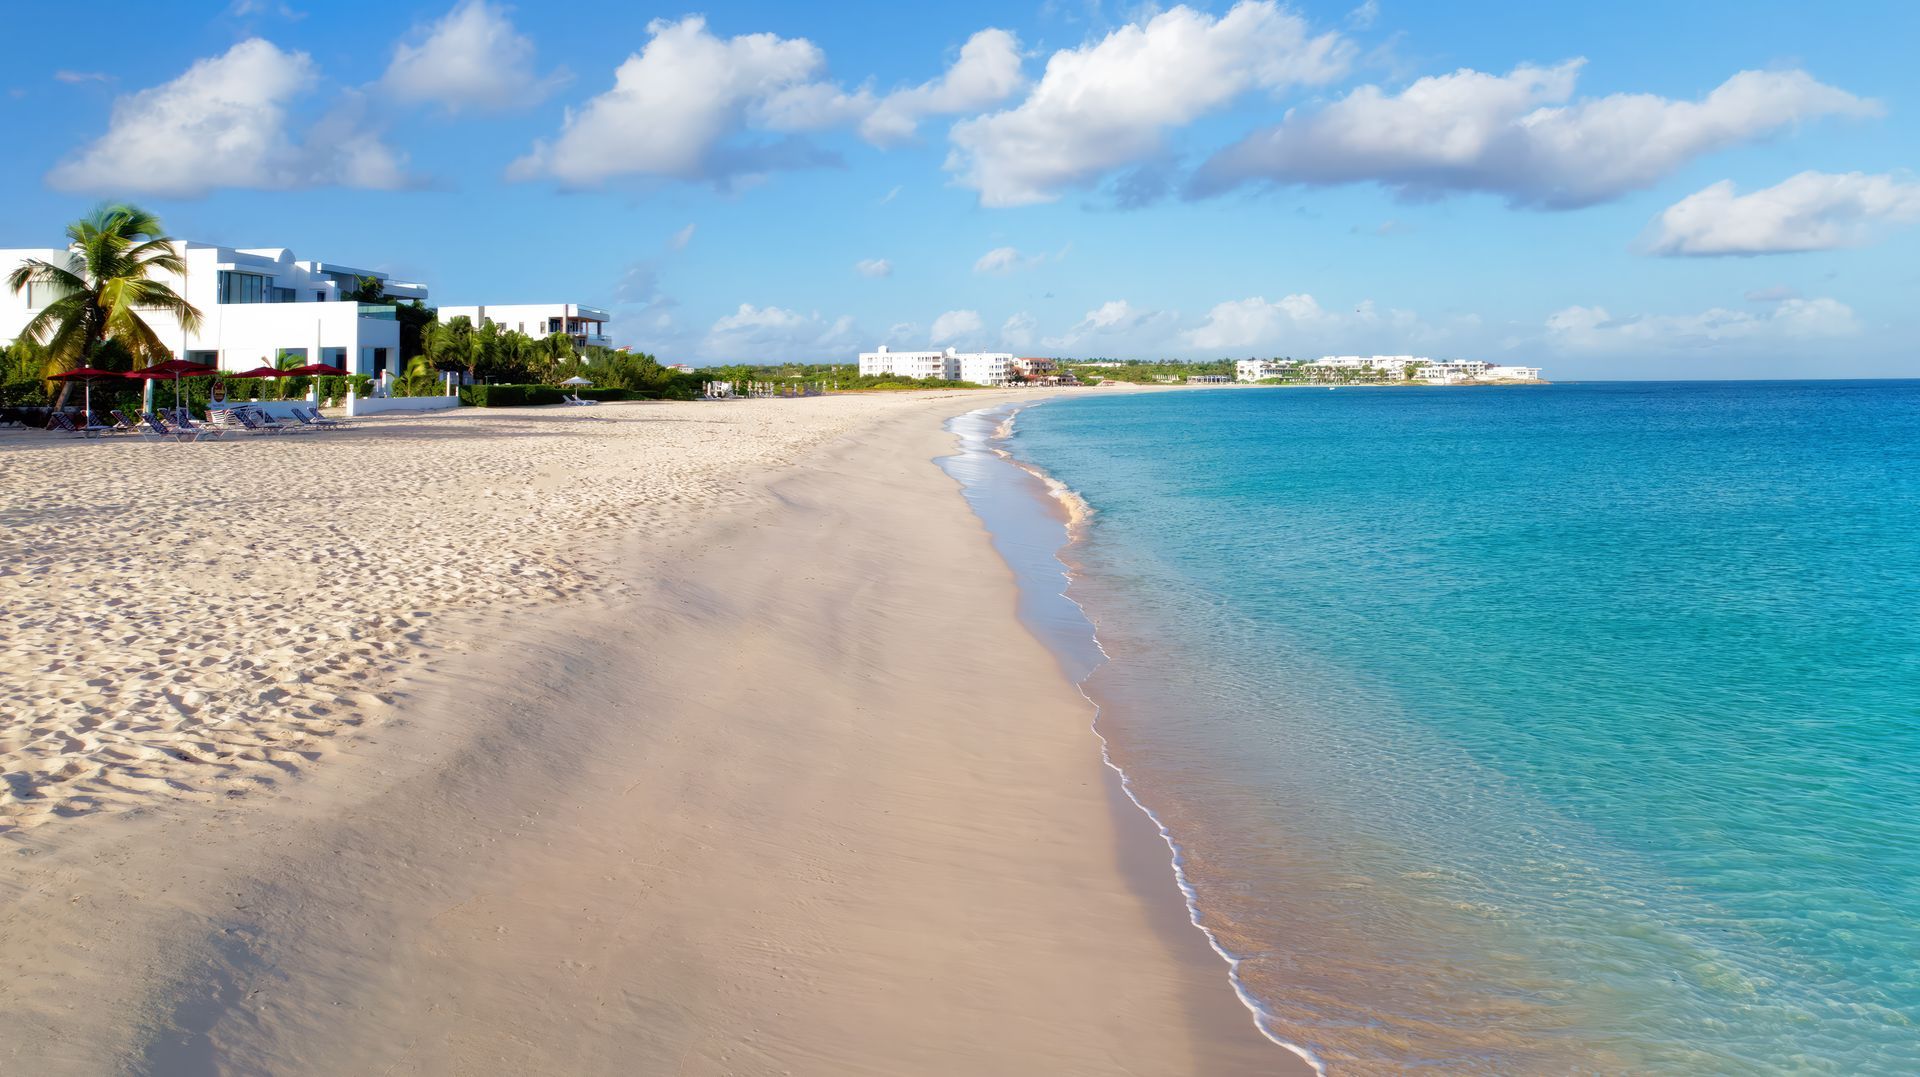 Meads Bay Beach, Anguilla